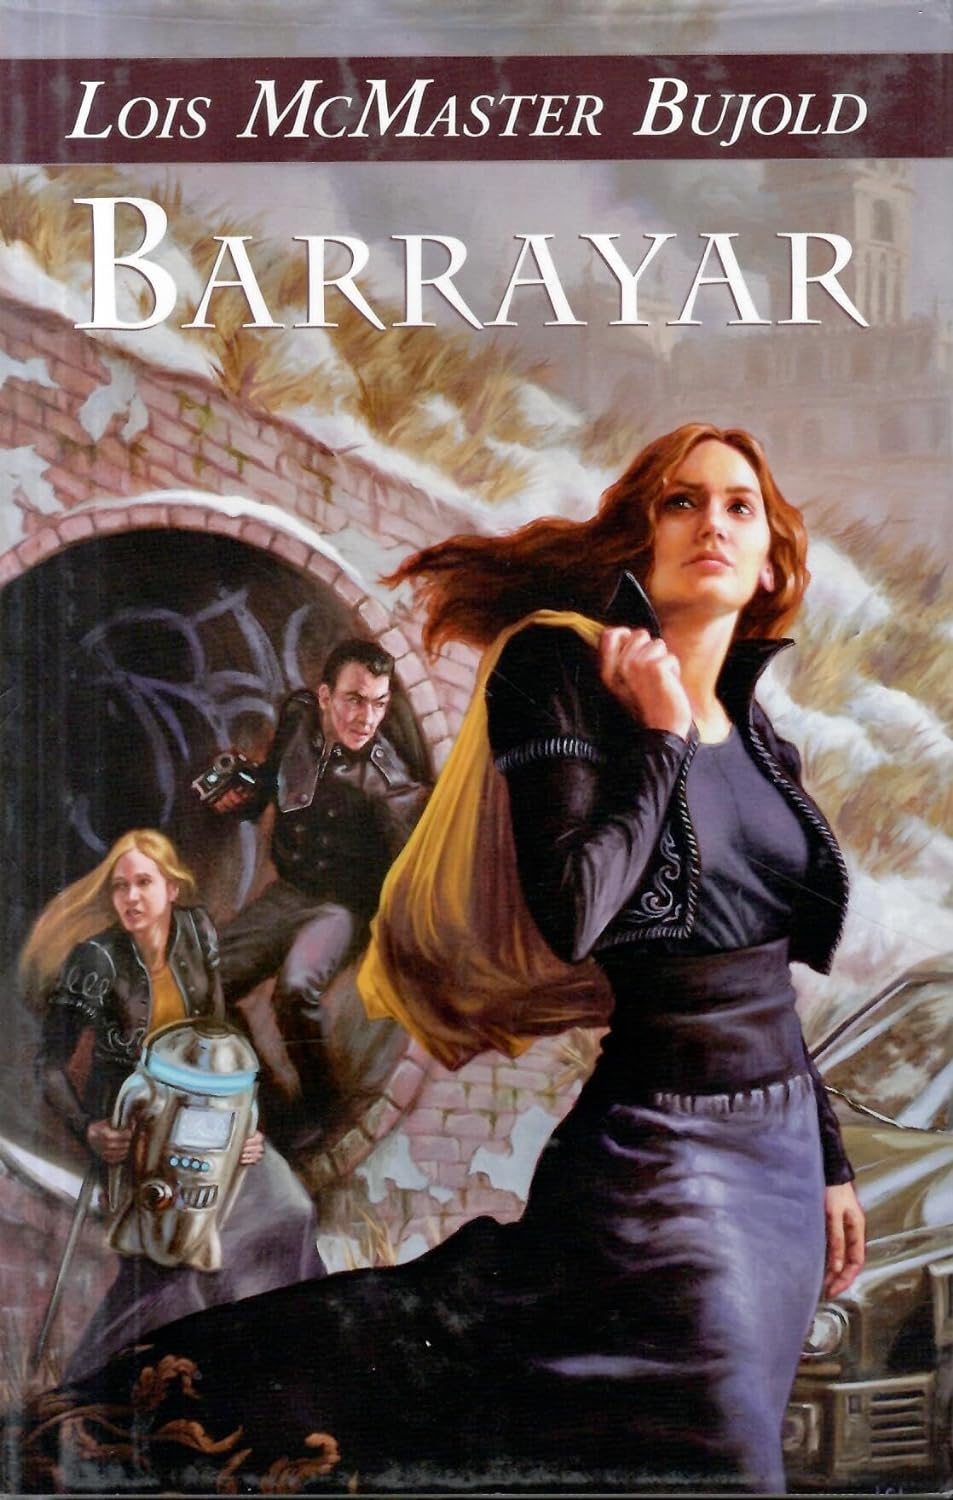 Cover of Barrayar by Lois McMaster Bujold, showing Bothari and Droushnakovi coming out of a tunnel carrying a uterine replicator, and Cordelia in the foreground carrying something in a bag over her shoulder.